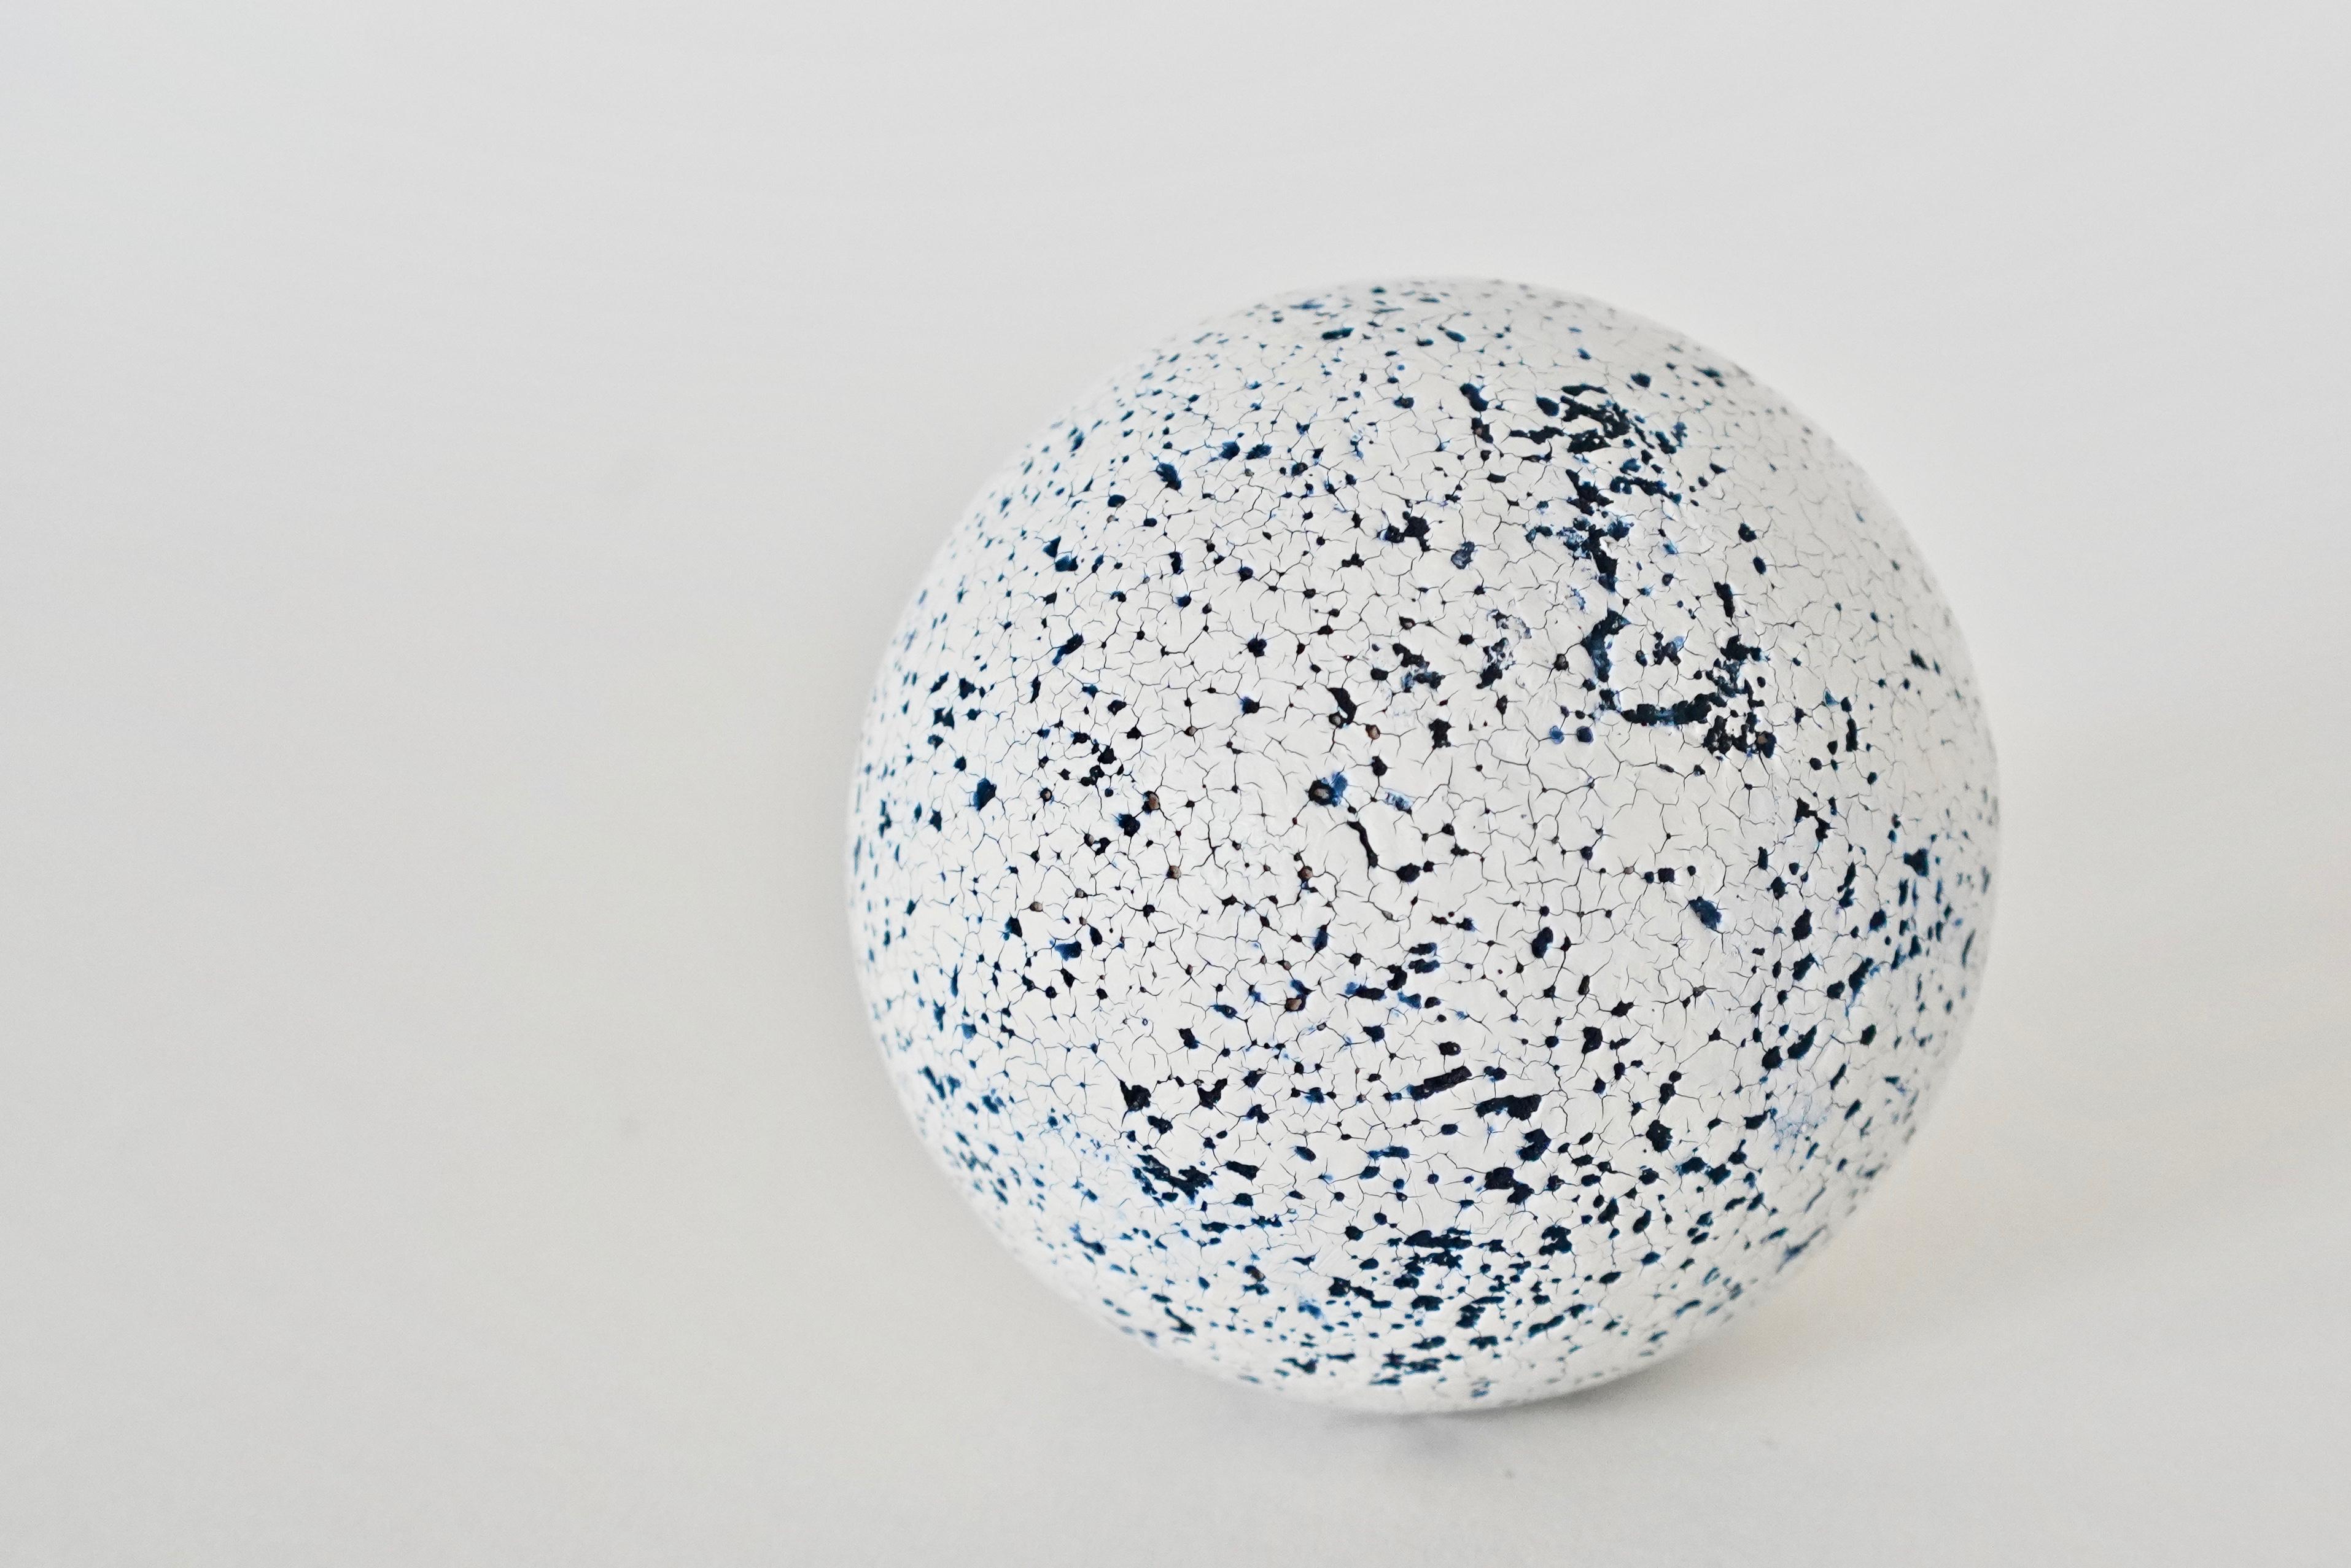 Hand-Crafted Blue, Black and White Crackle-Surfaced Ceramic Sphere, Hand Built Sculpture For Sale